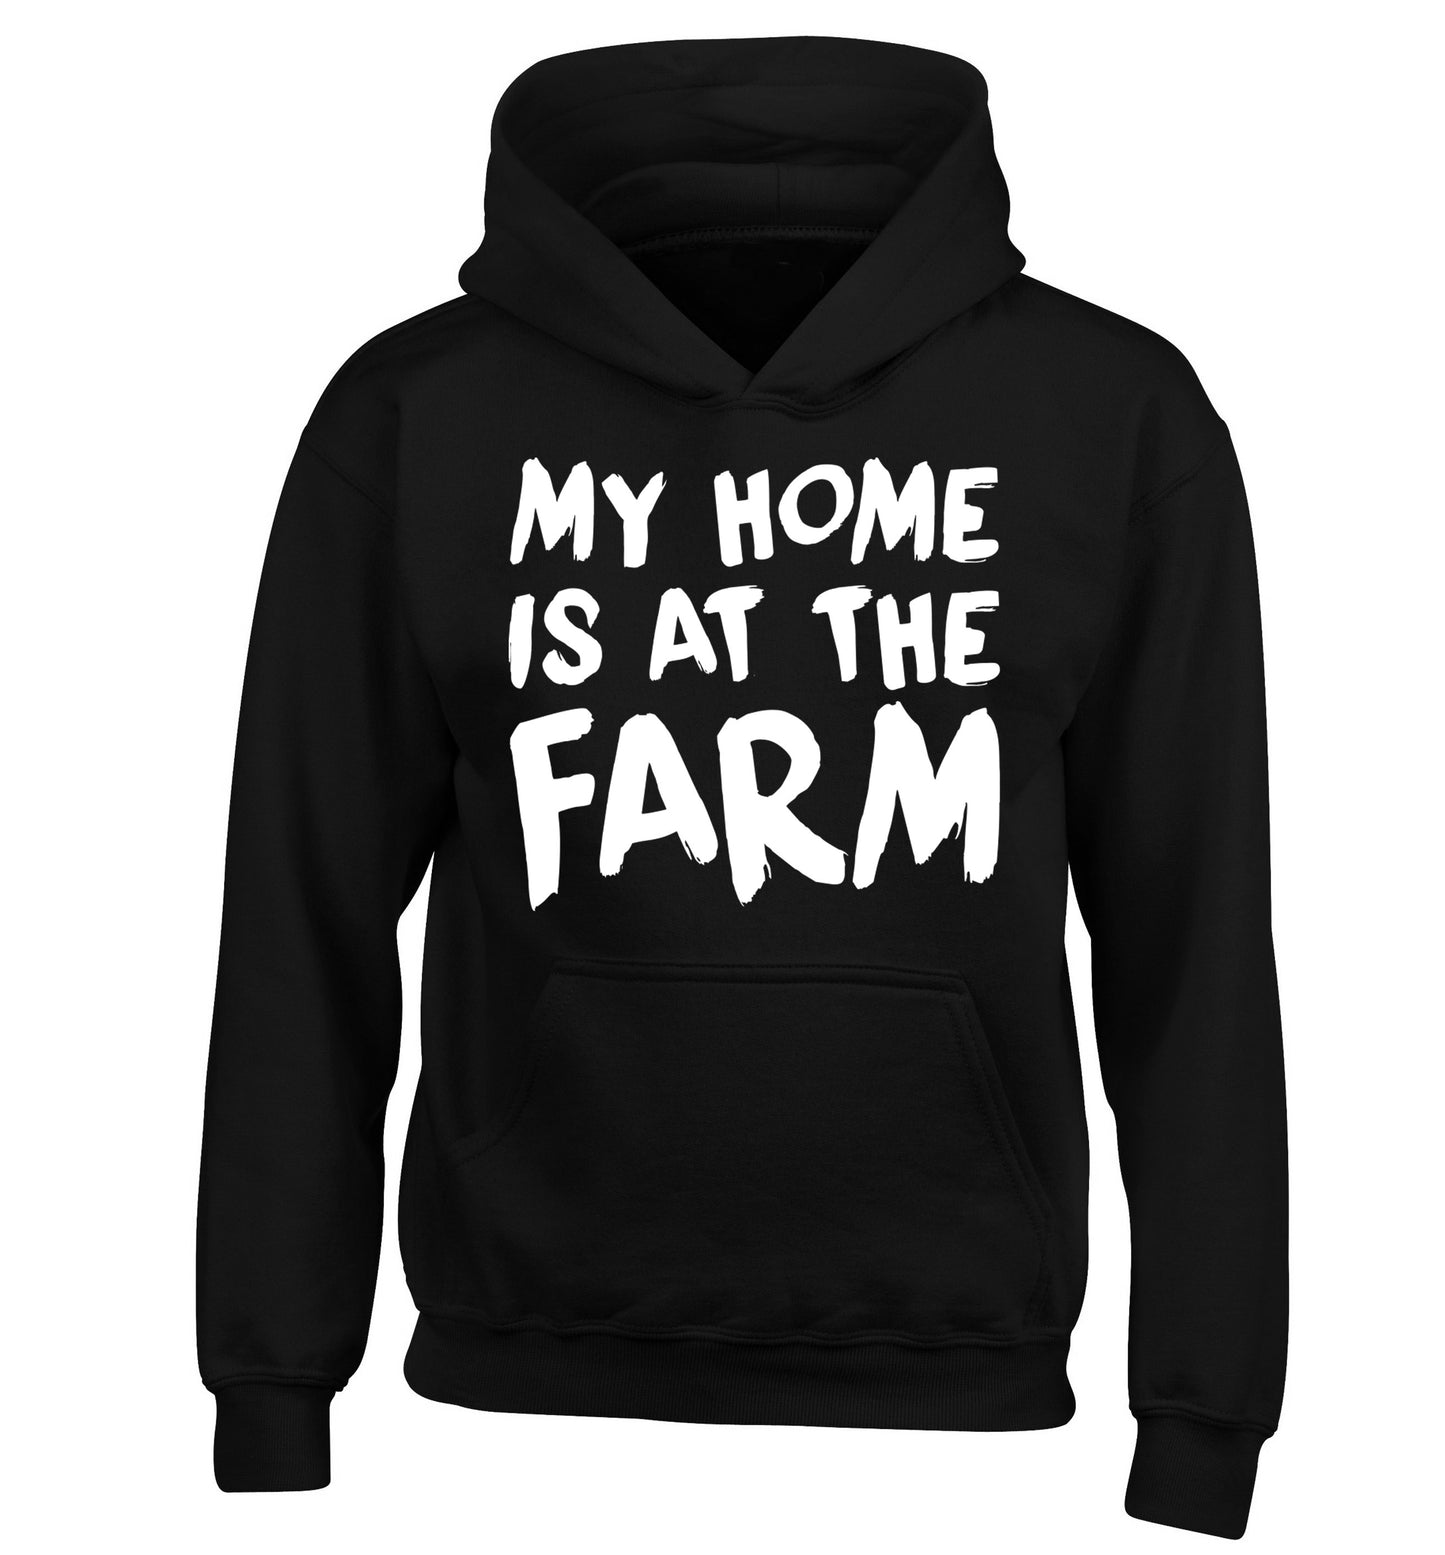 My home is at the farm children's black hoodie 12-14 Years